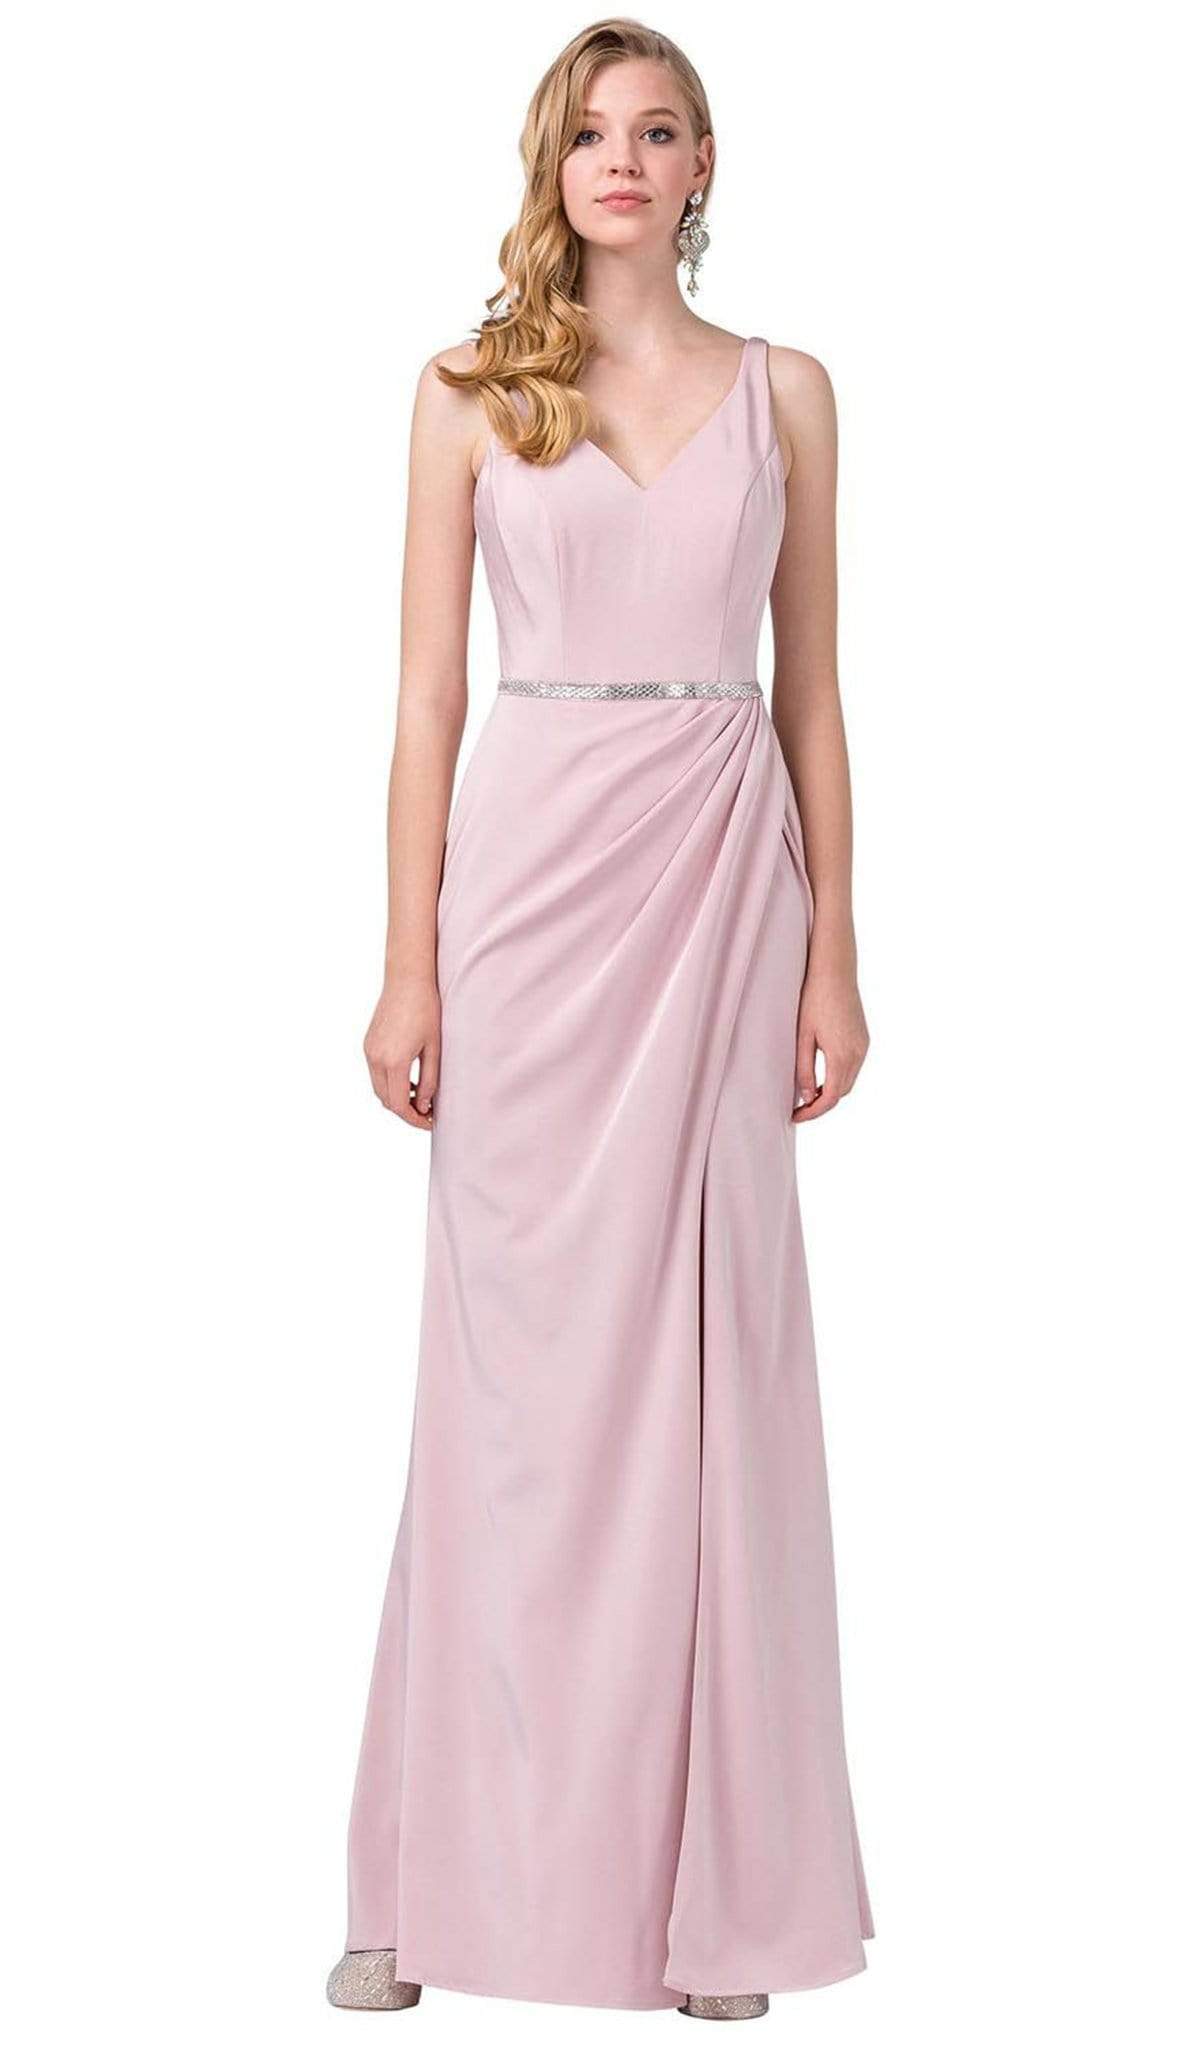 Dancing Queen - 2632 Sleeveless V-neck Embellished Trumpet Dress Special Occasion Dress XS / Blush